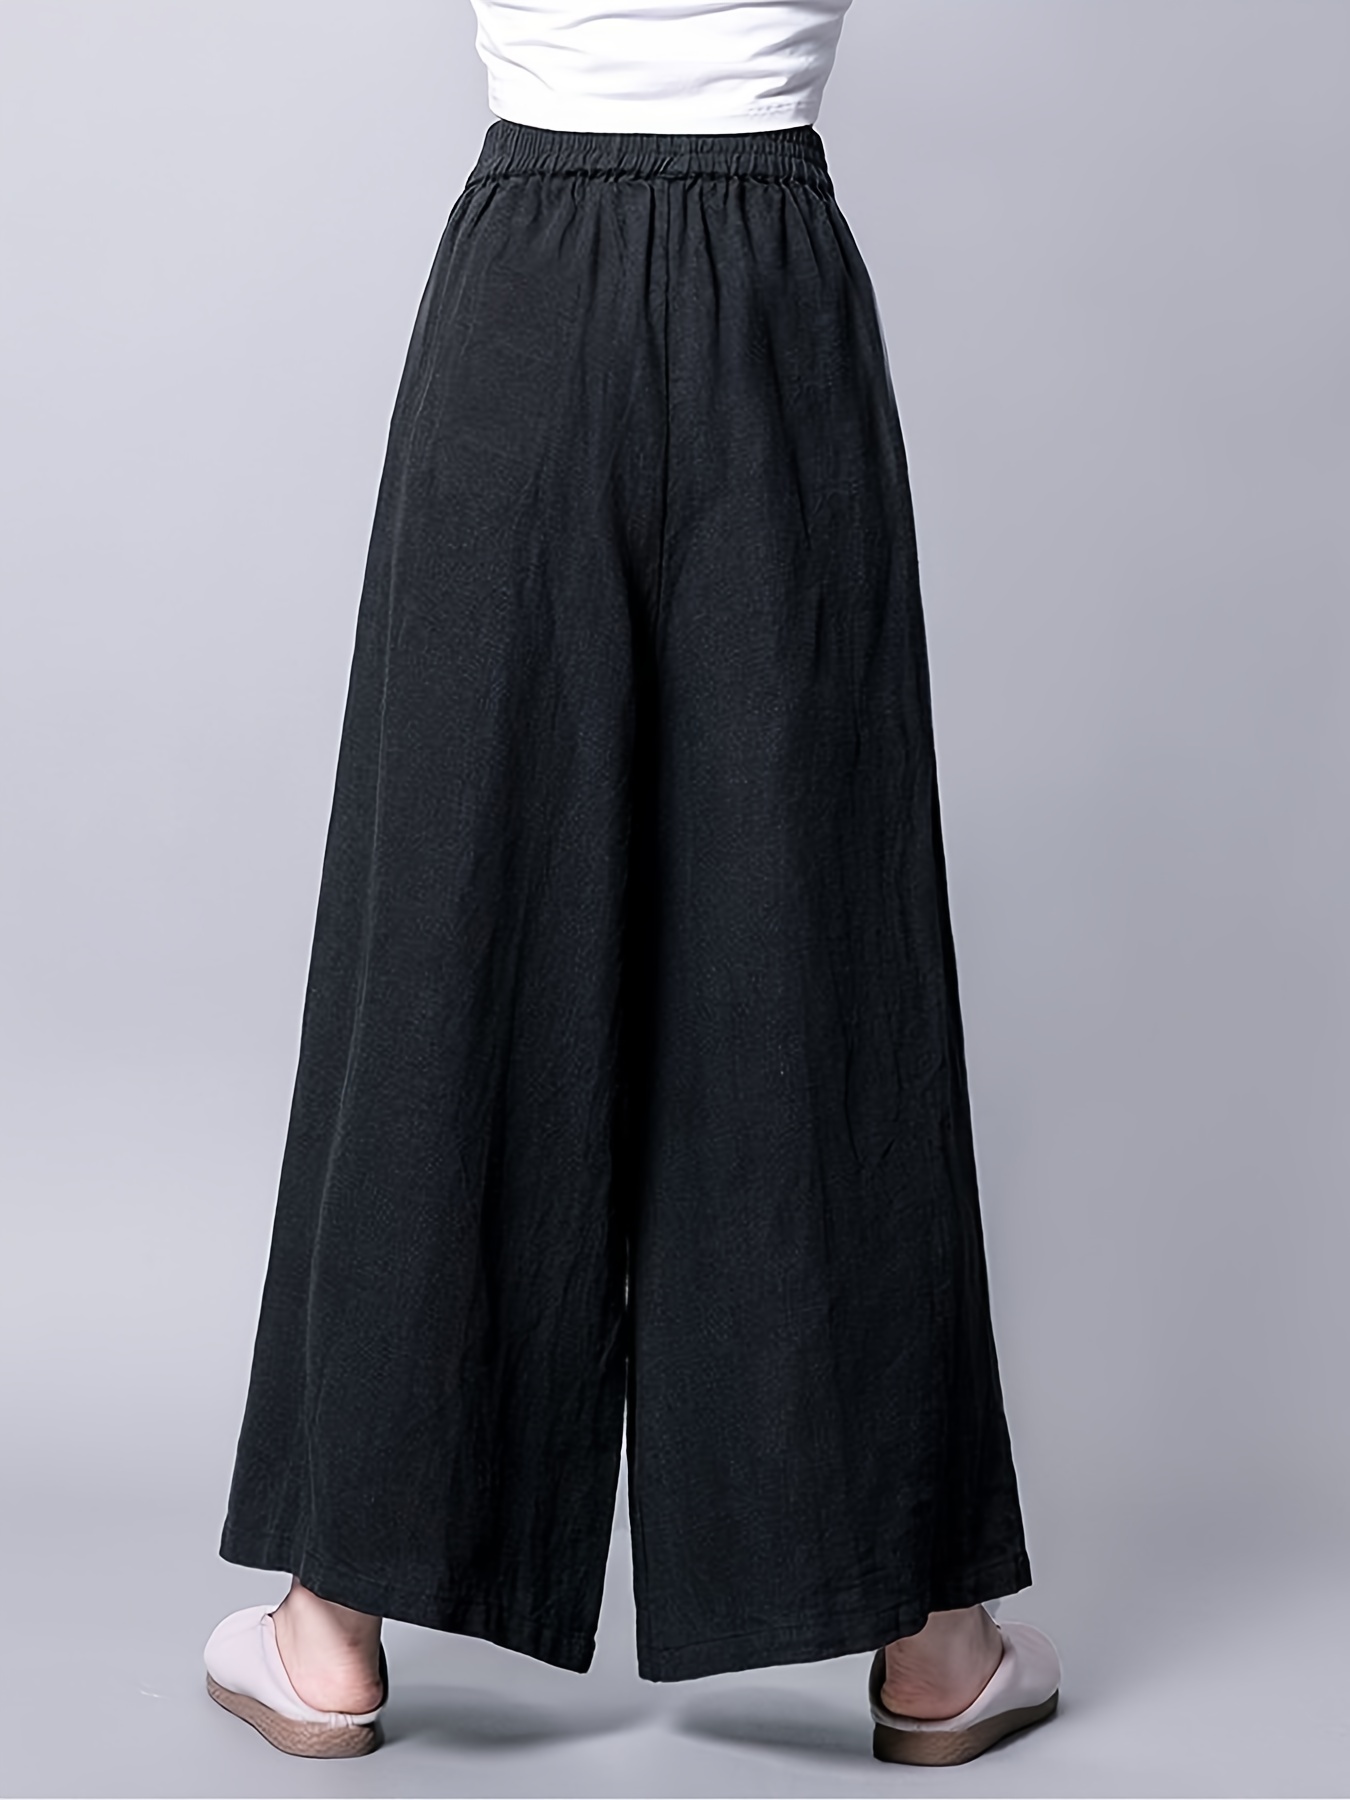 Tall Sustainable Brands  Linen pants outfit, How to wear linen pants, Wide  leg linen pants